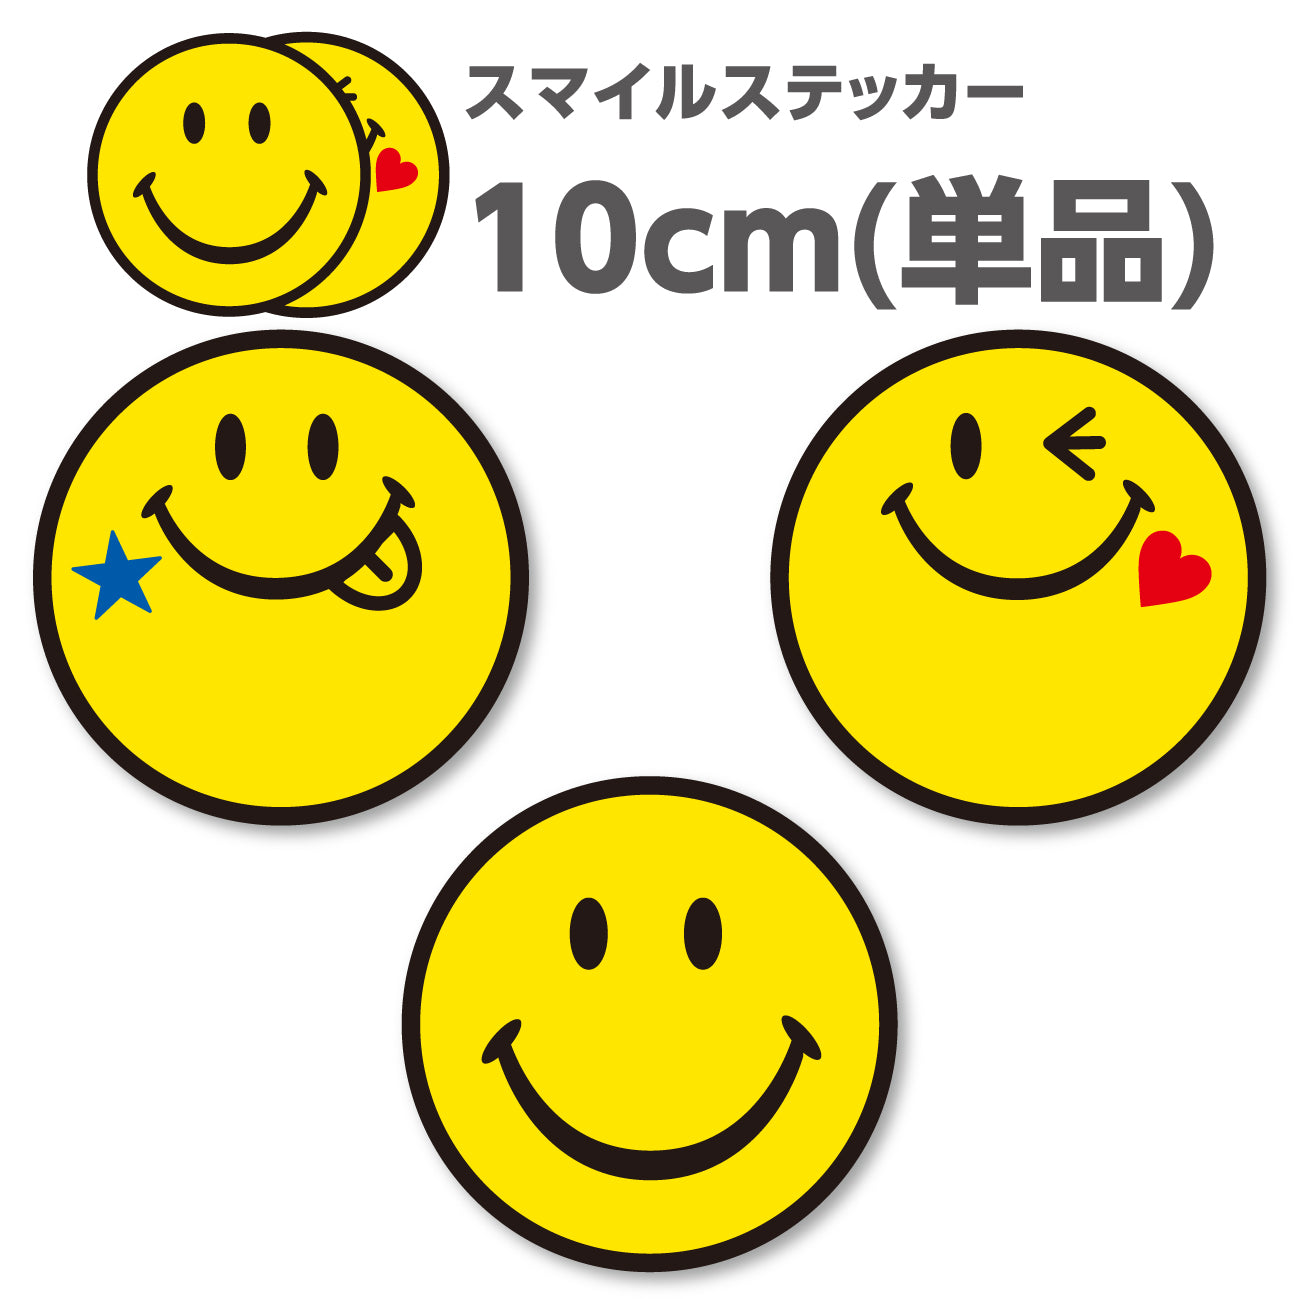 Smiley Face スマイルマーク シールステッカー 超防水 防滴 Uvカット 屋外使用可 S101 Stckrs